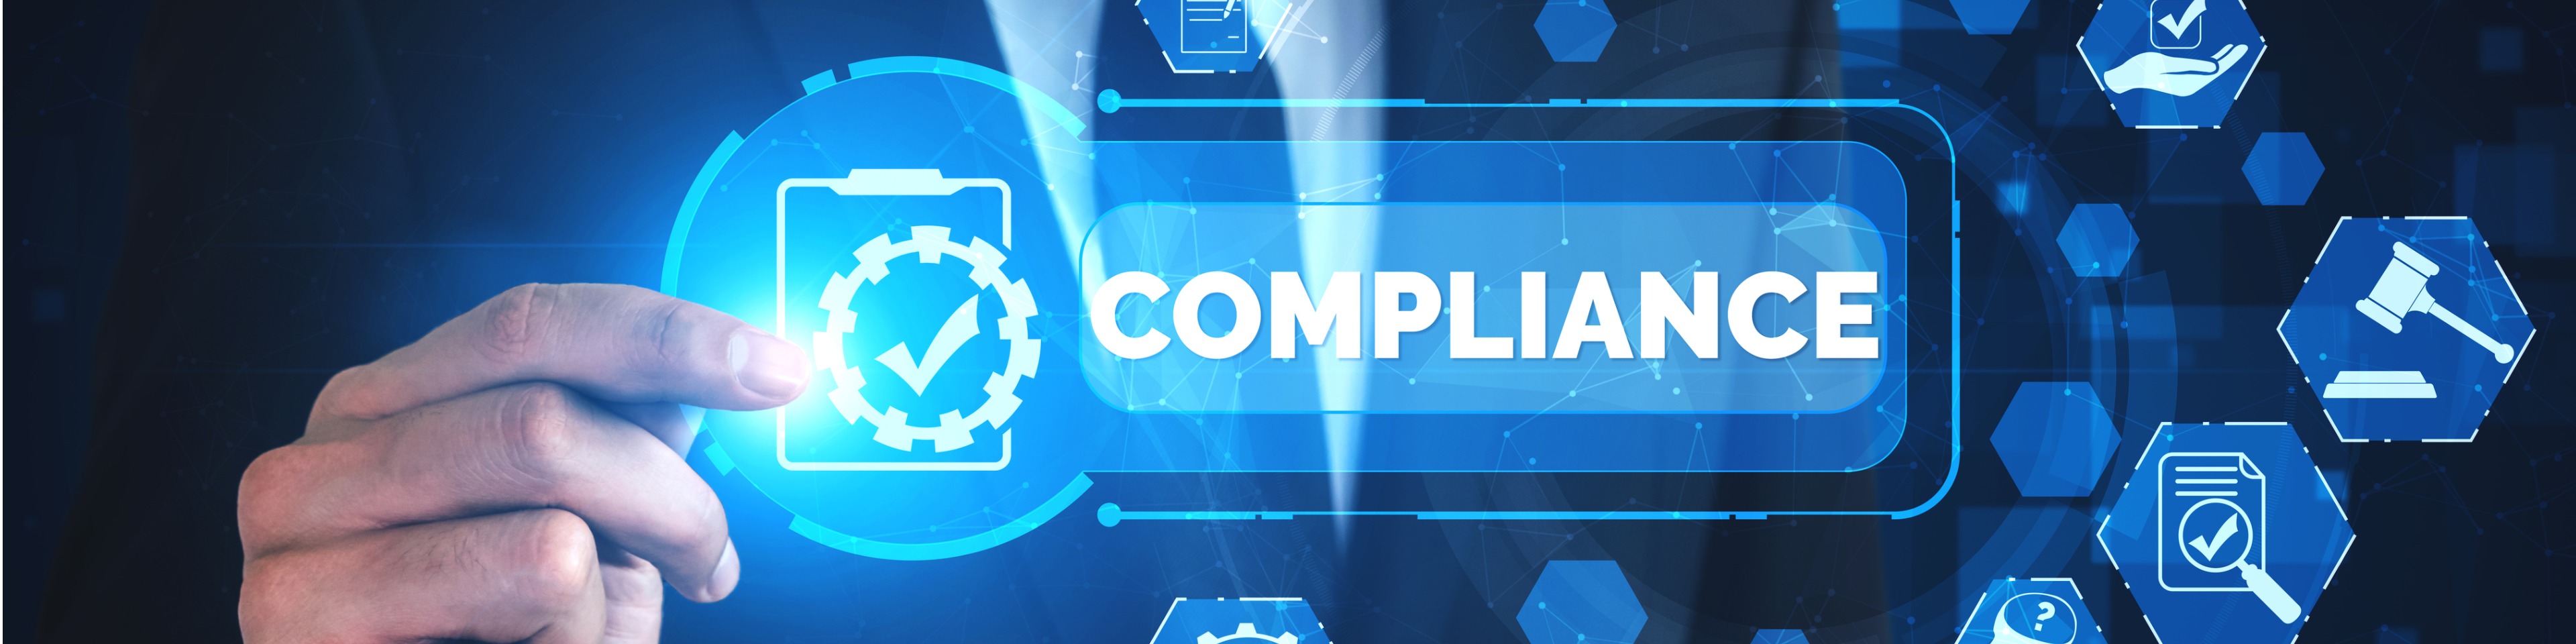 Why-the-general-counsel-should-care-about-regulatory-compliance-software-2x